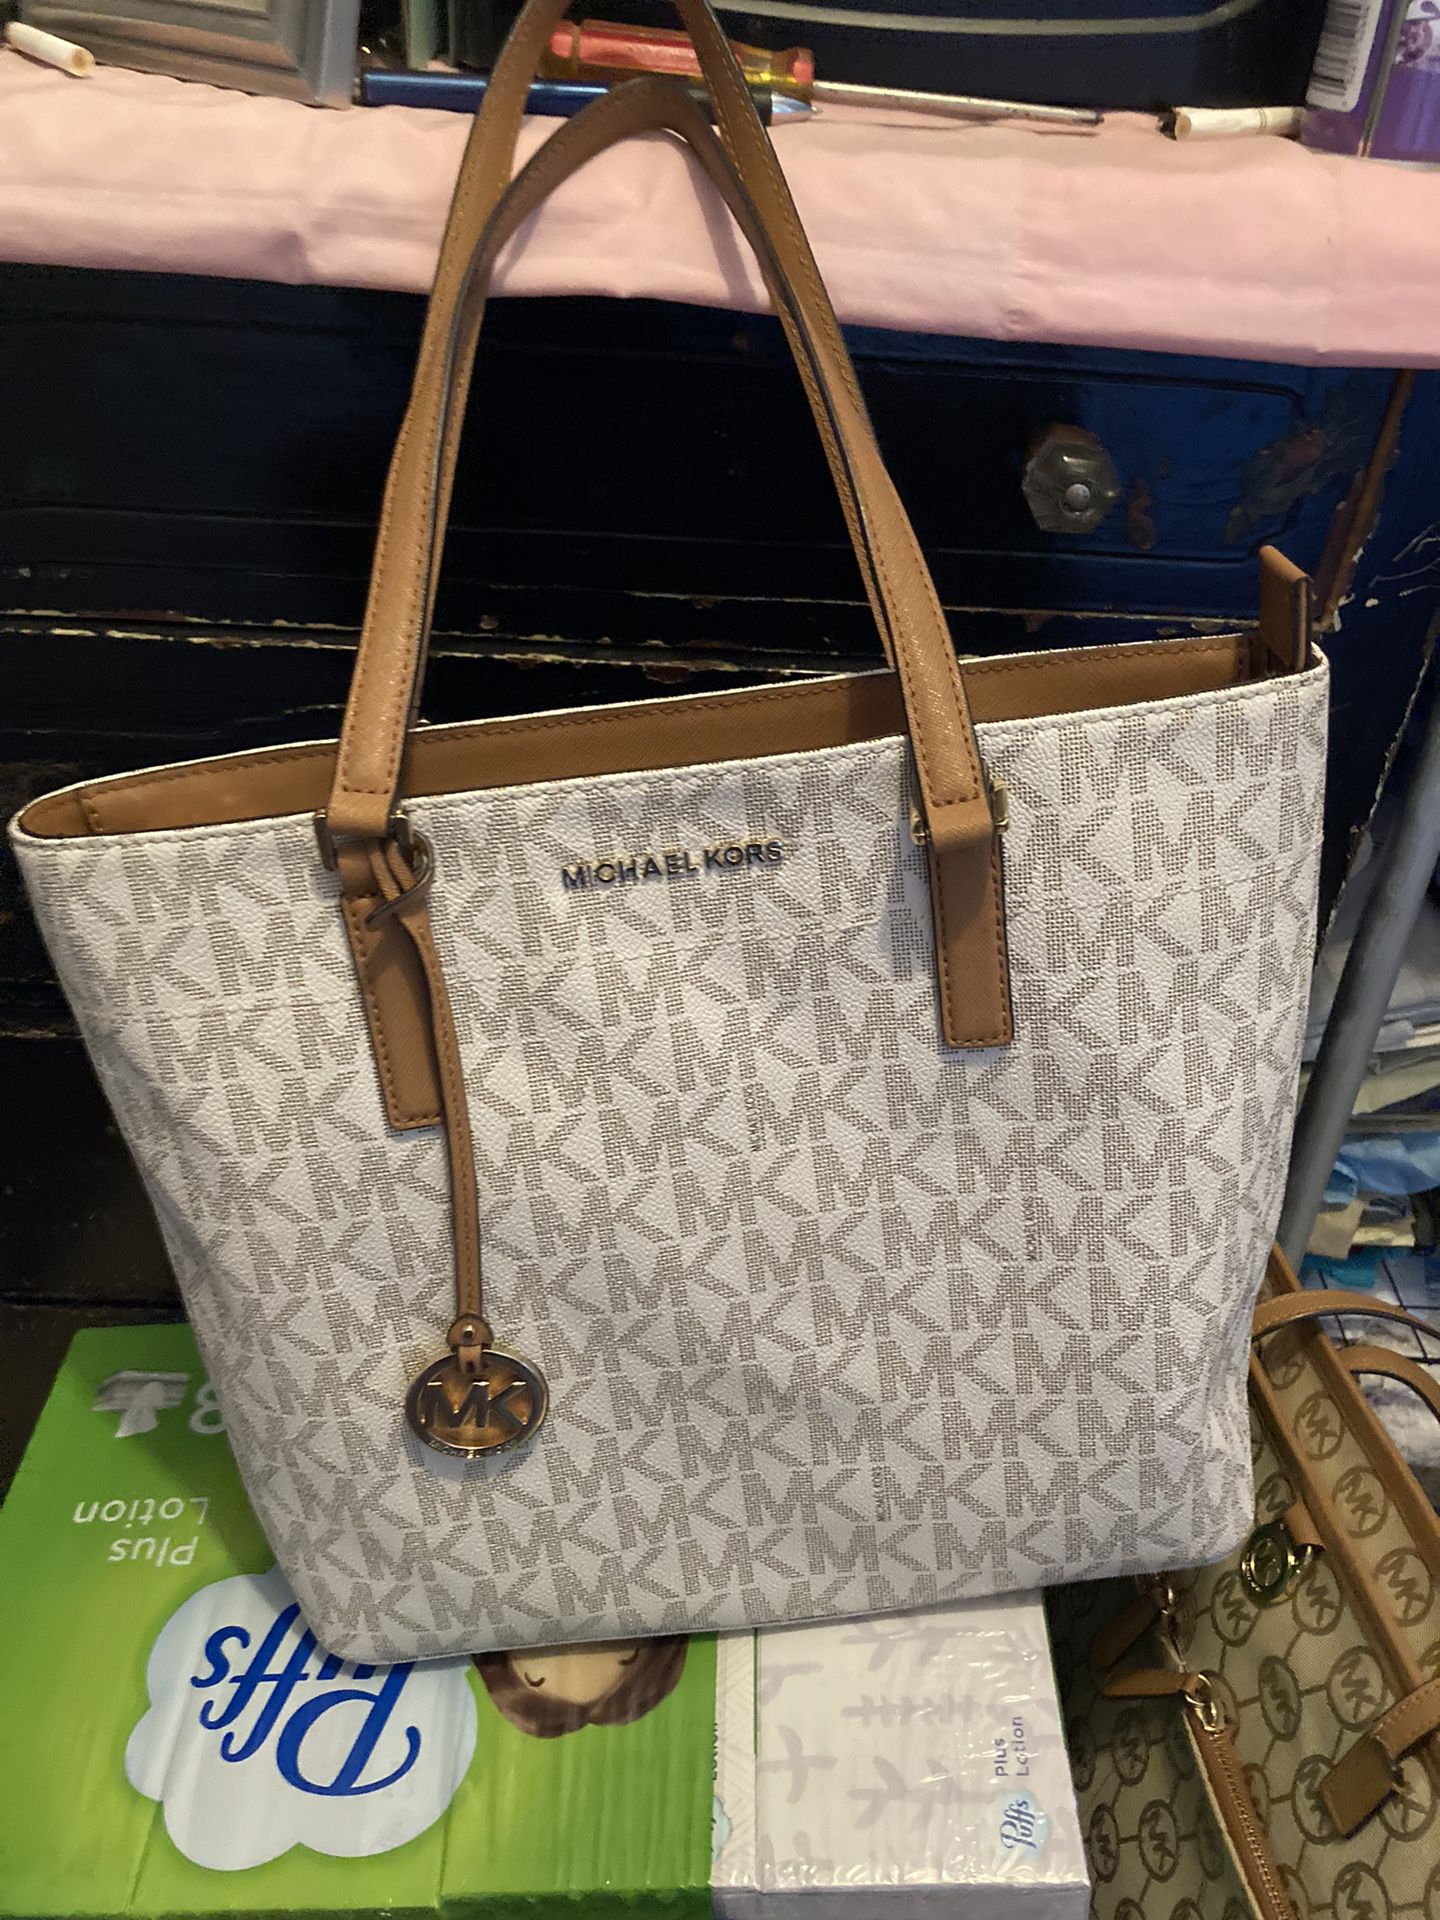 Michael Kors Purse 3 for Sale in Clear Brook, VA - OfferUp